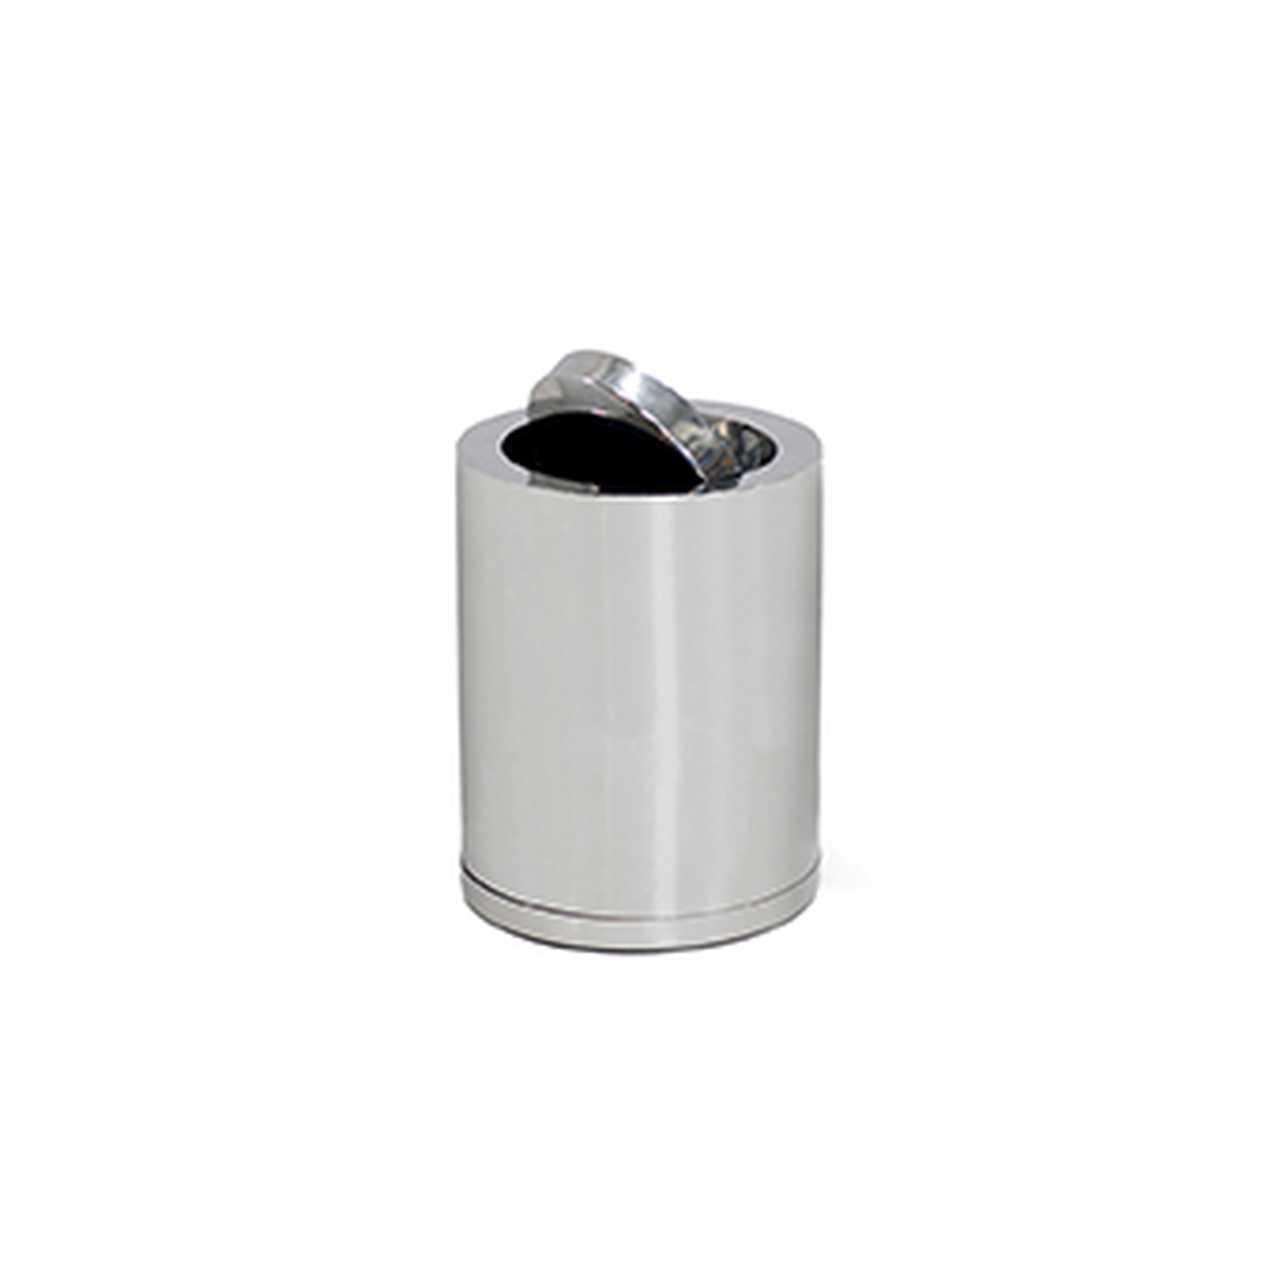 CRASTER Stainless Steel Waste Bin with Lid